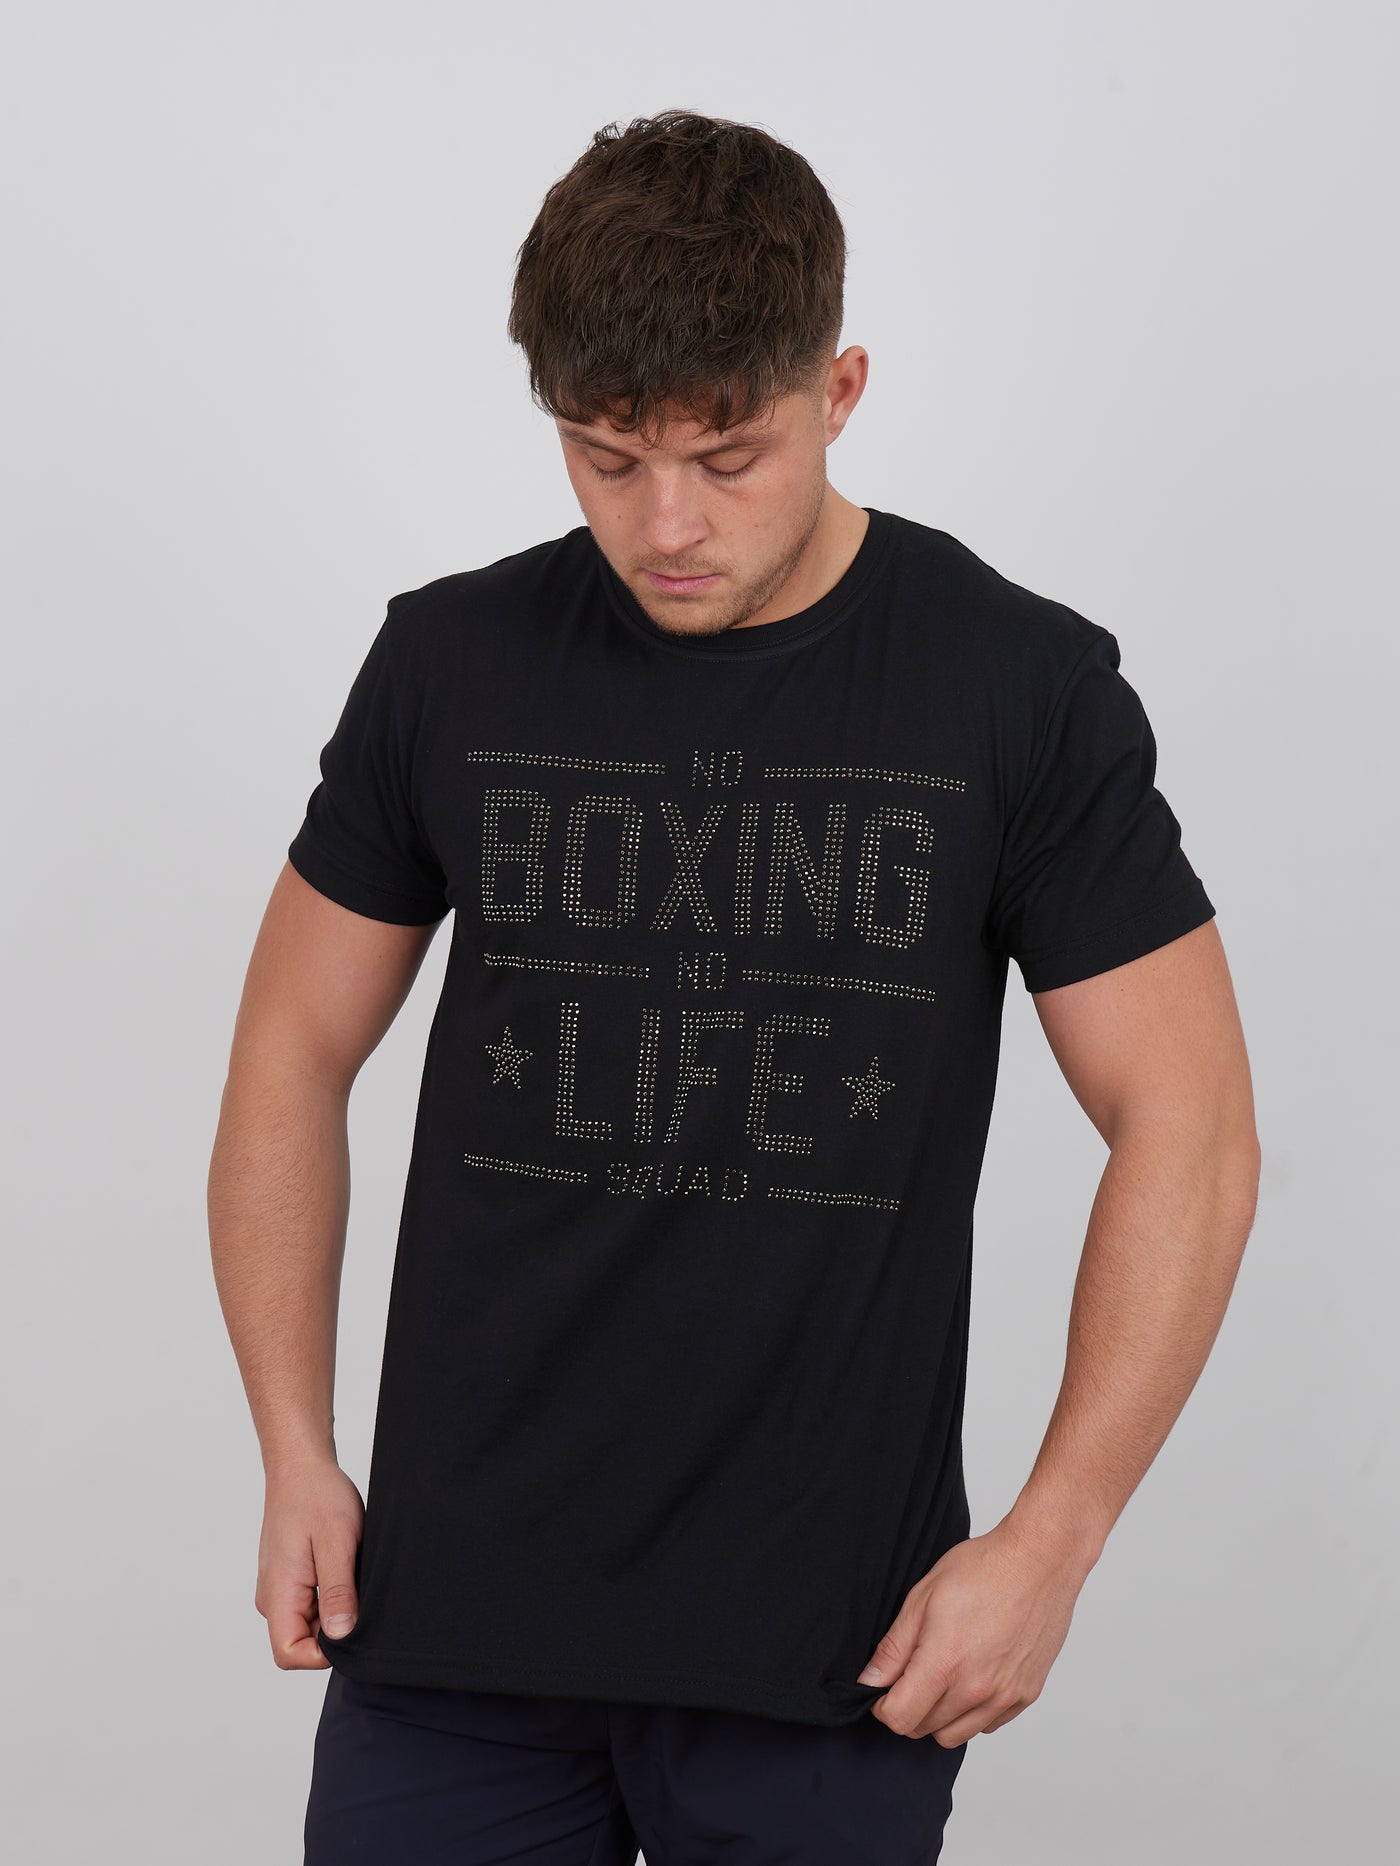 OFFICIAL NO BOXING NO LIFE - T Shirt Black with Silver Diamonte